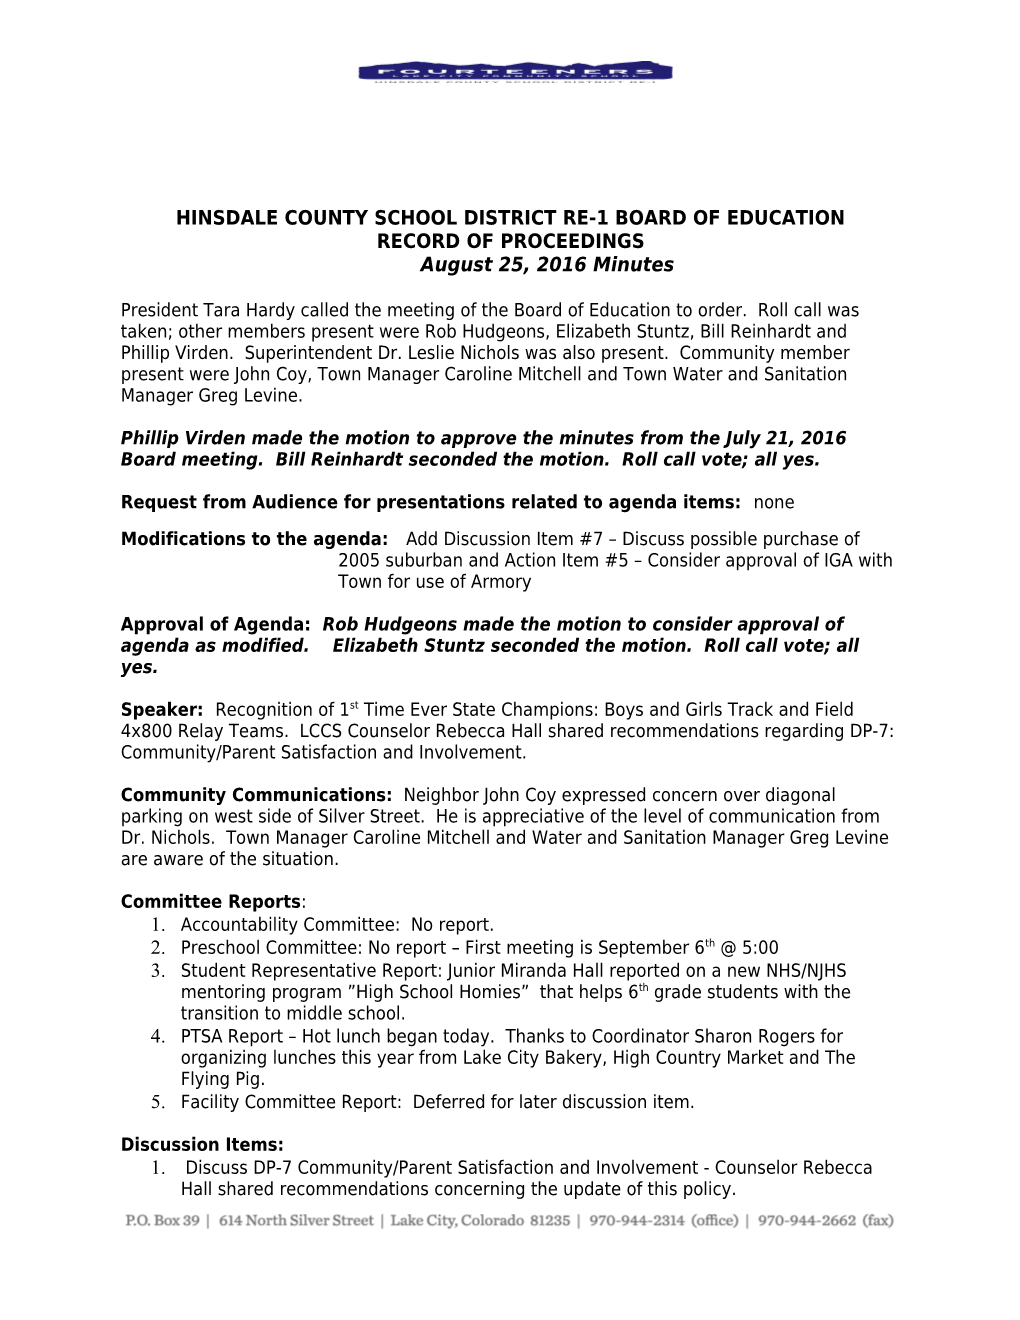 Hinsdale County School District Re-1 Board of Education